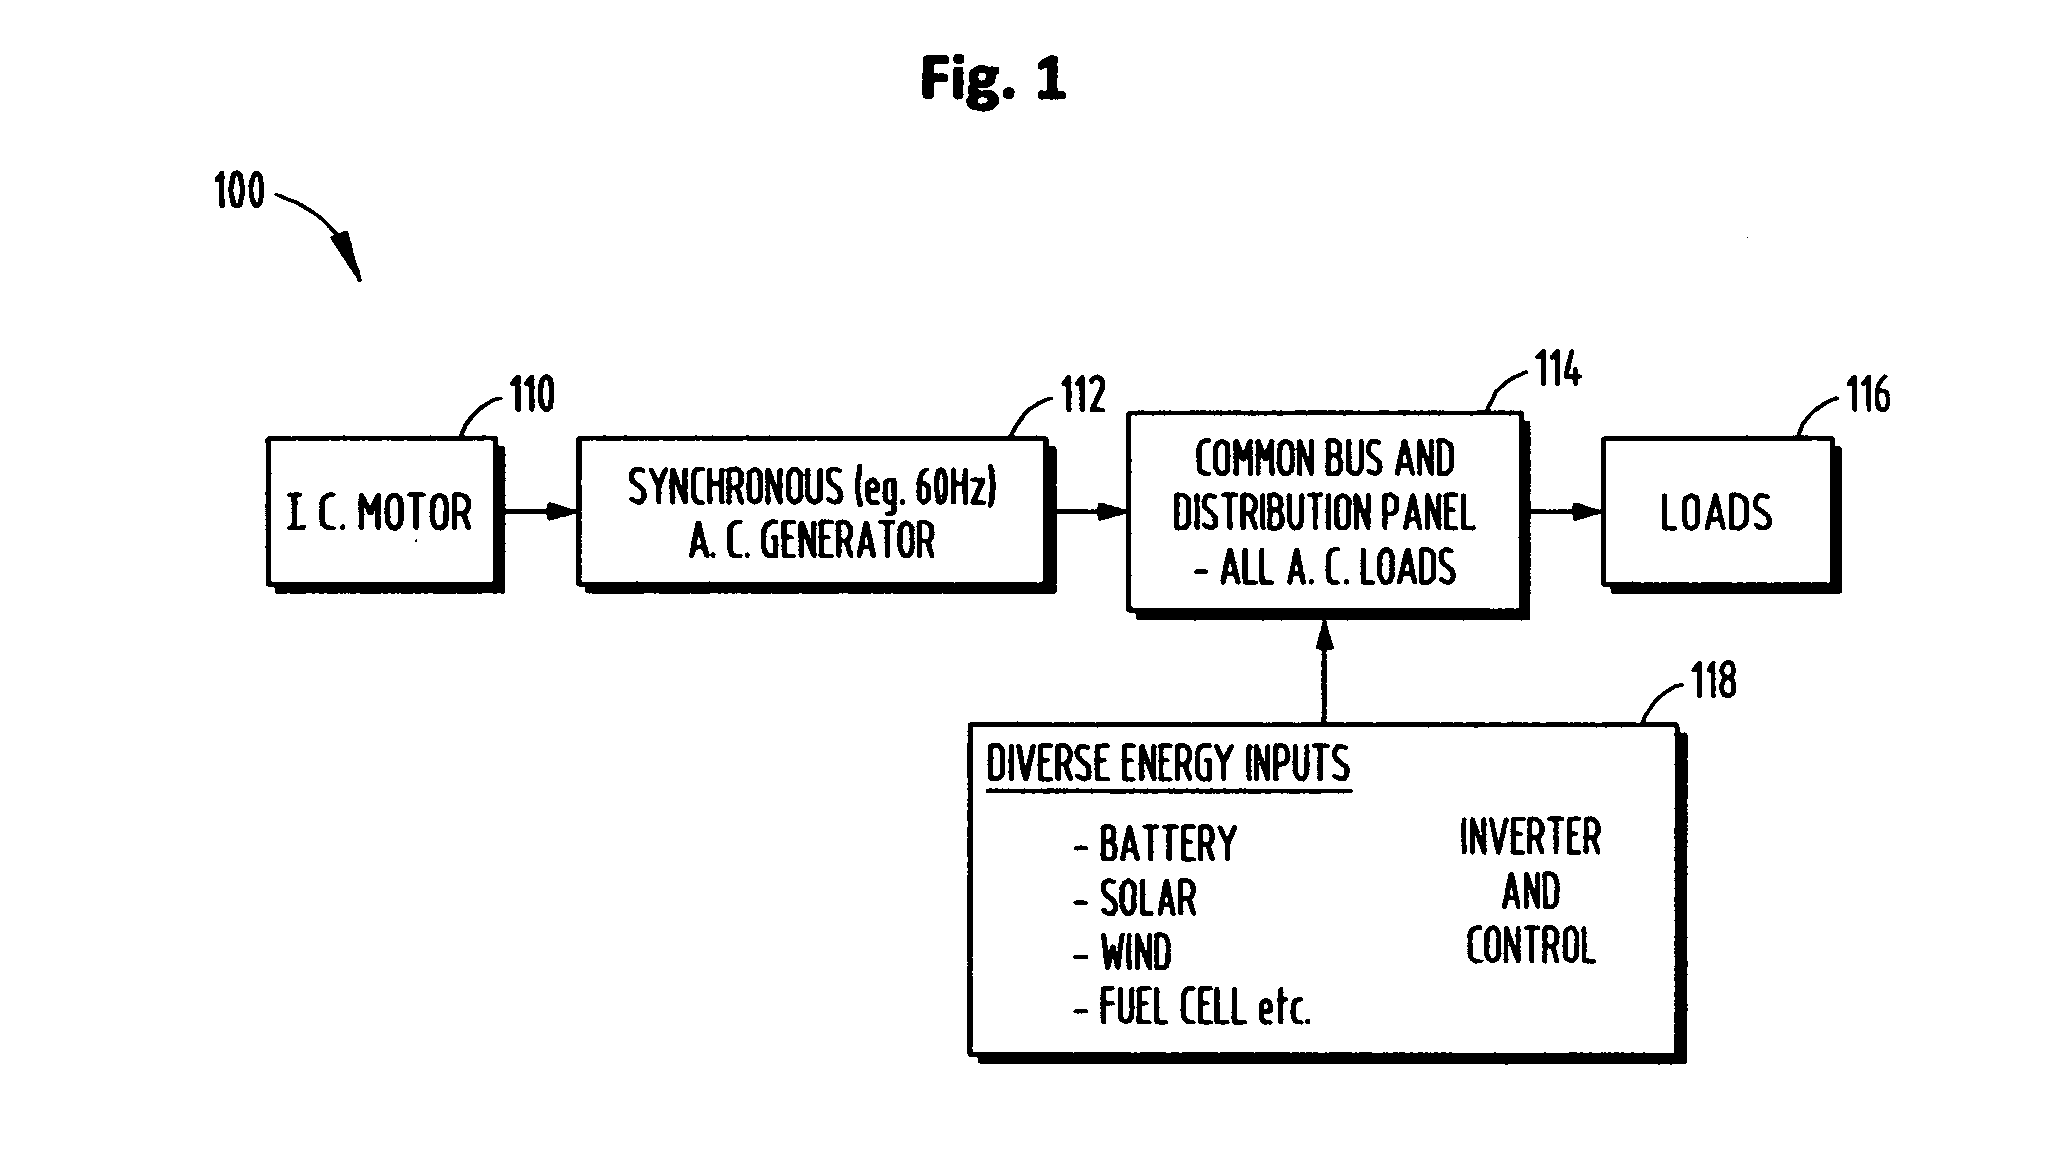 Power generation system with integrated renewable energy generation, energy storage, and power control